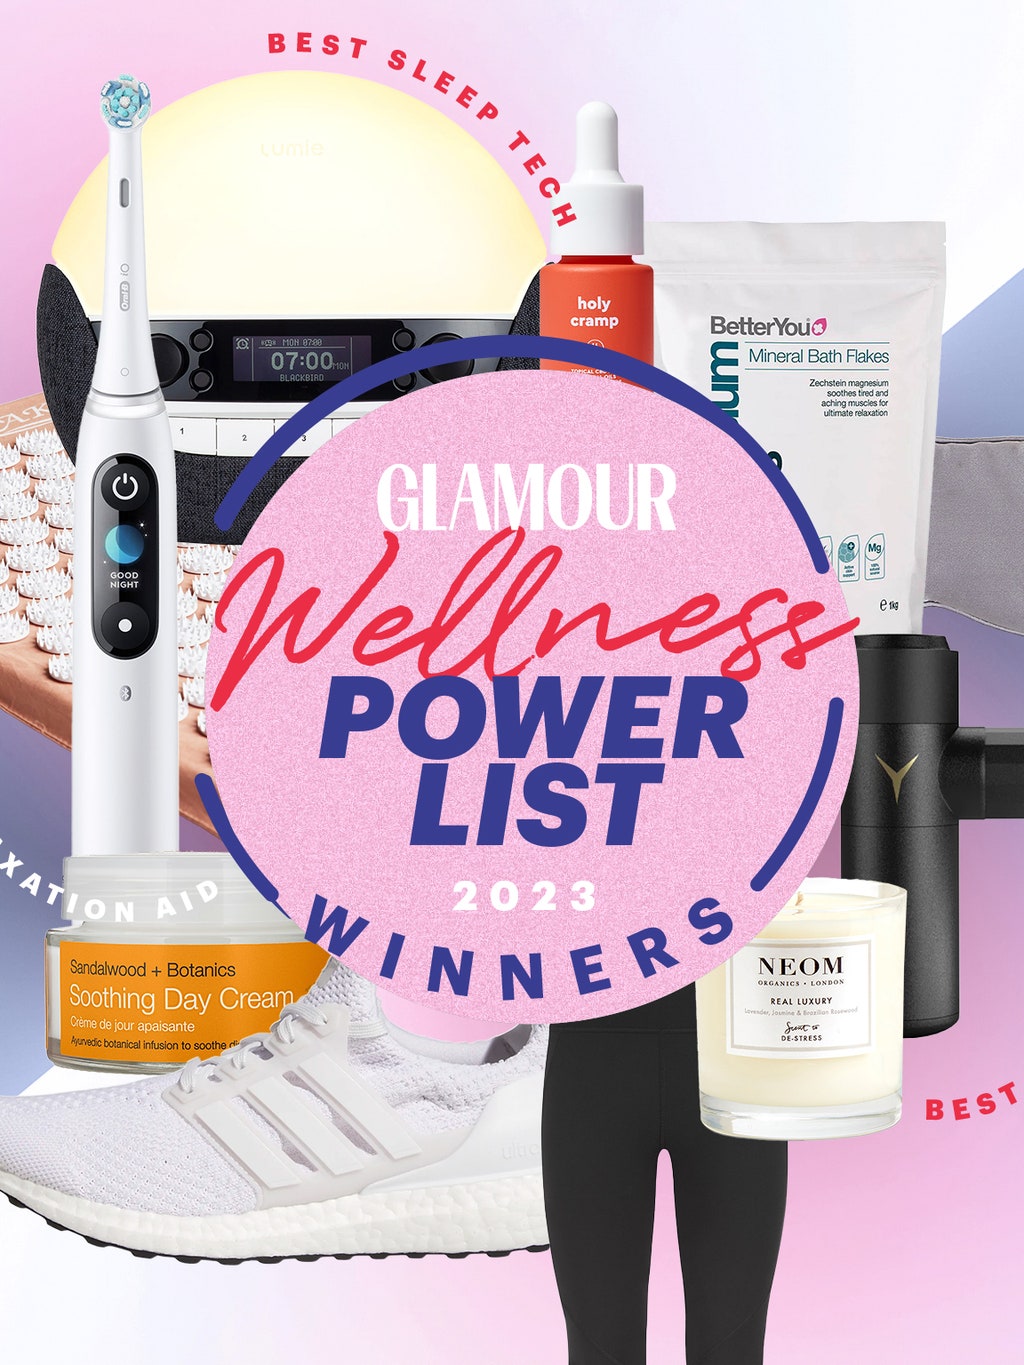 The winners of the GLAMOUR Wellness Power List 2023 are here! We reveal the 56 best products and brands across health, fitness and self-care